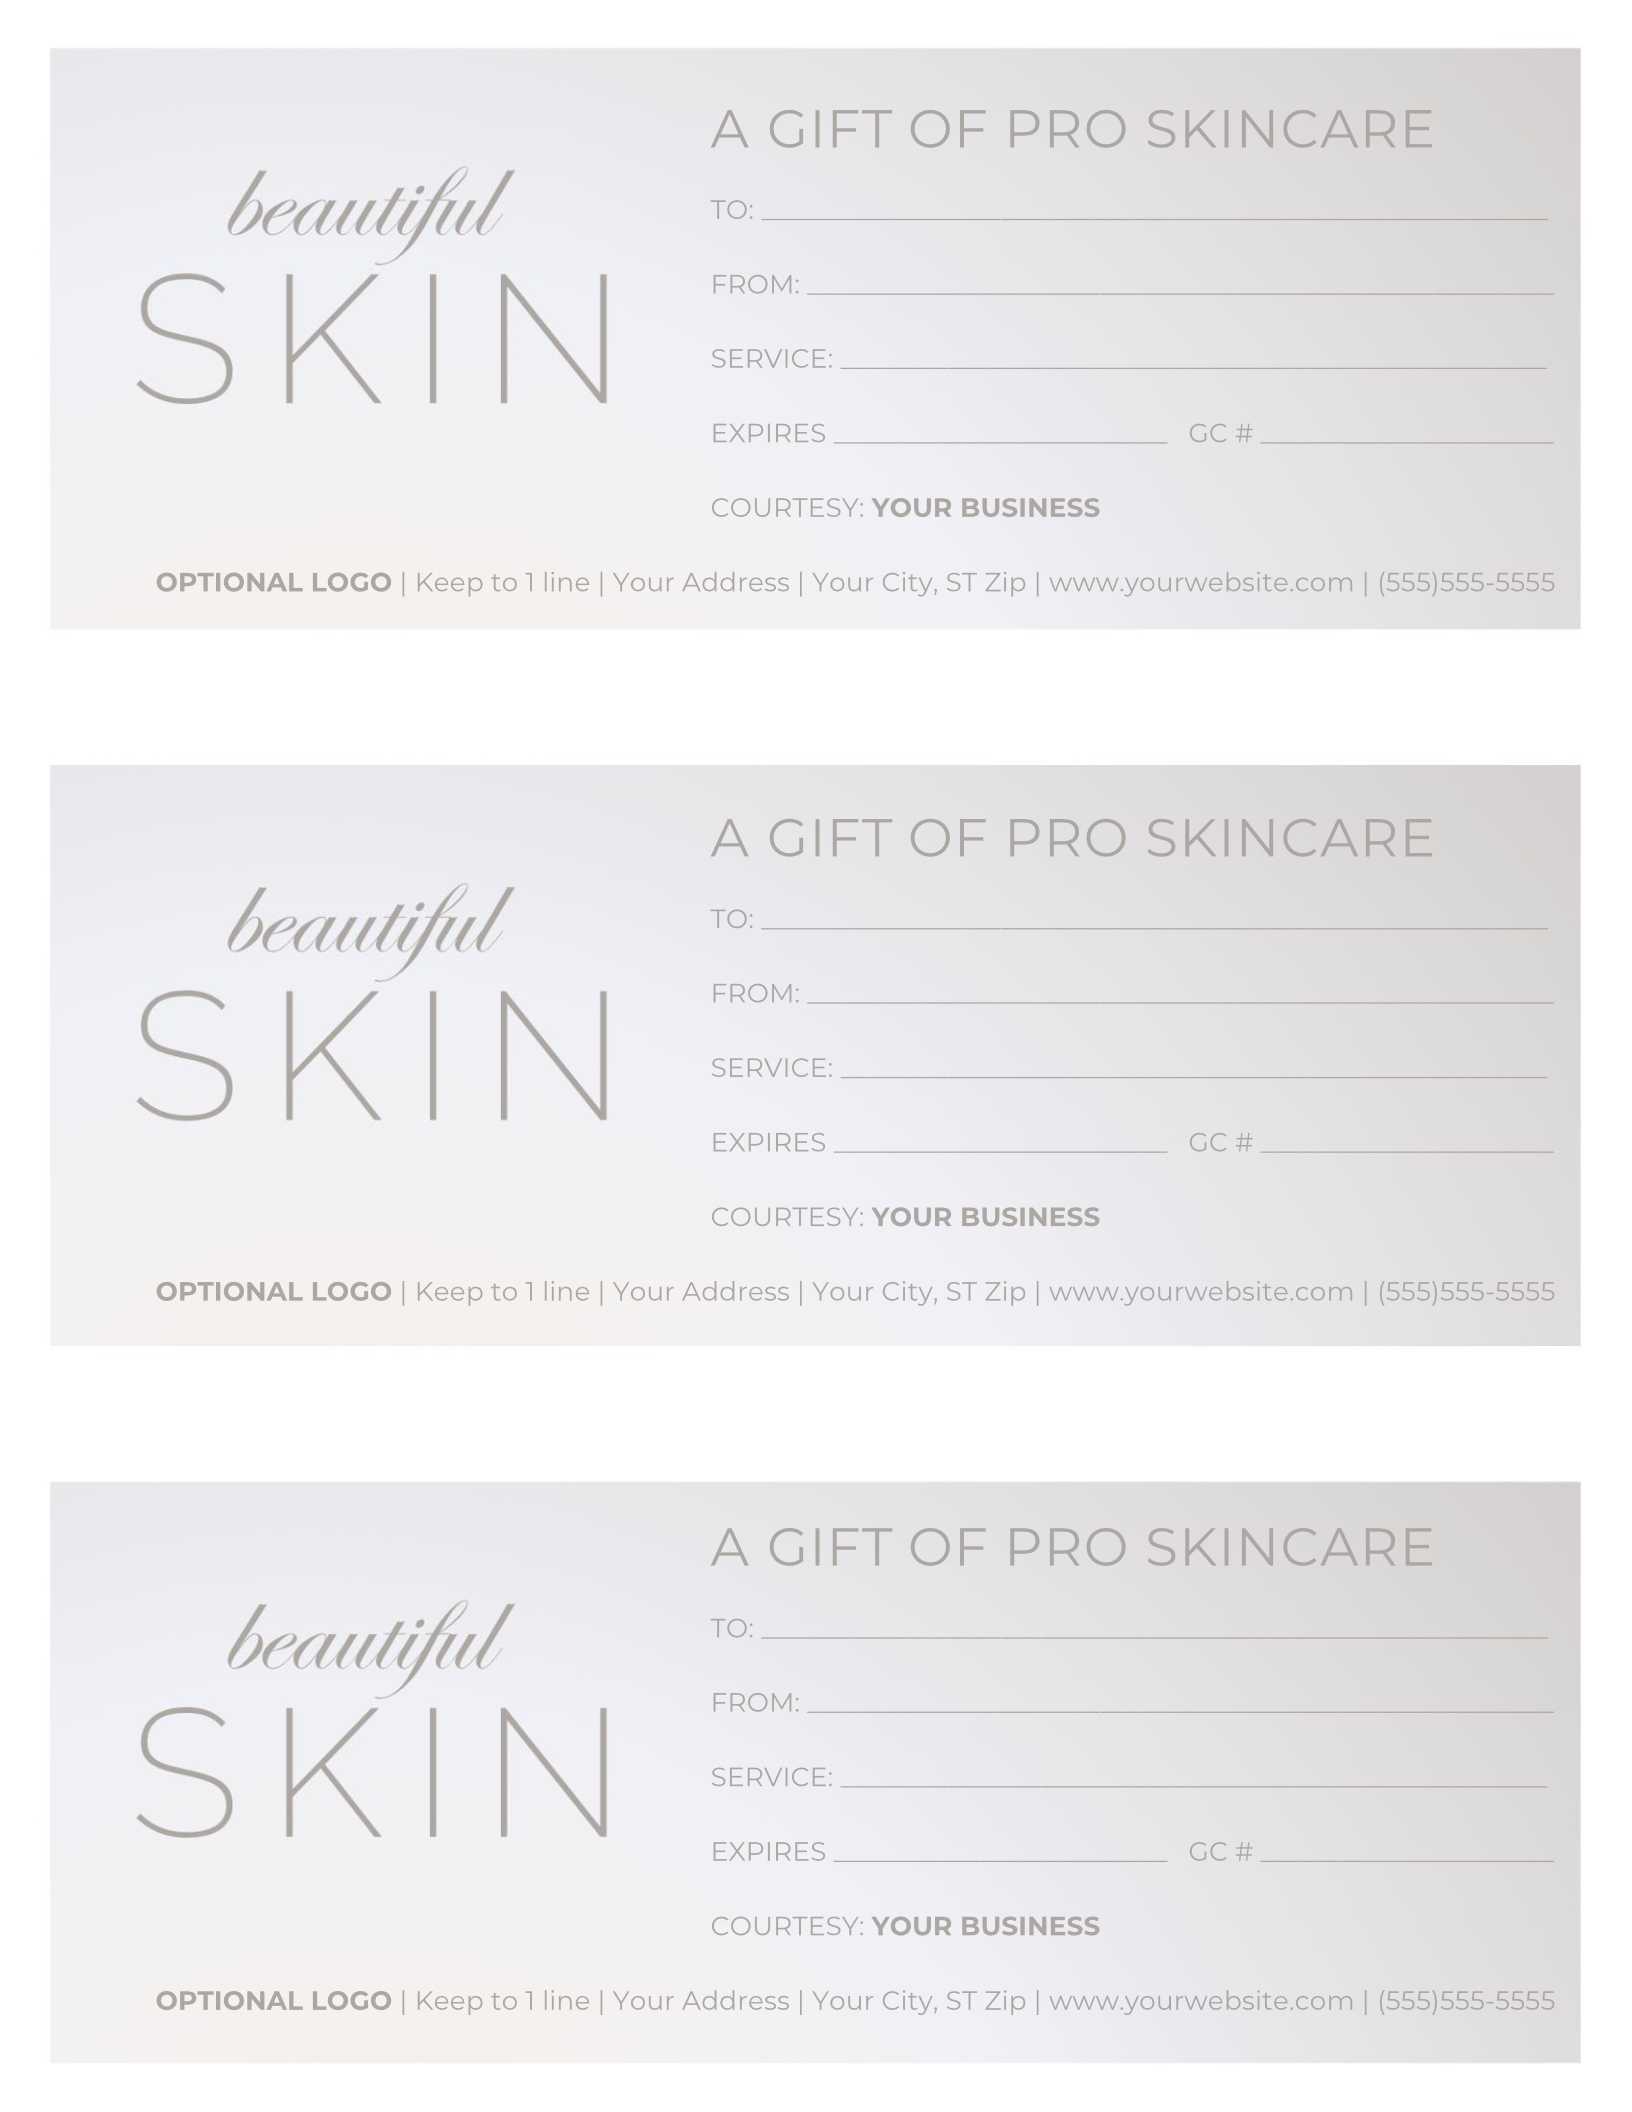 Free Gift Certificate Templates For Massage And Spa With Gift Certificate Log Template